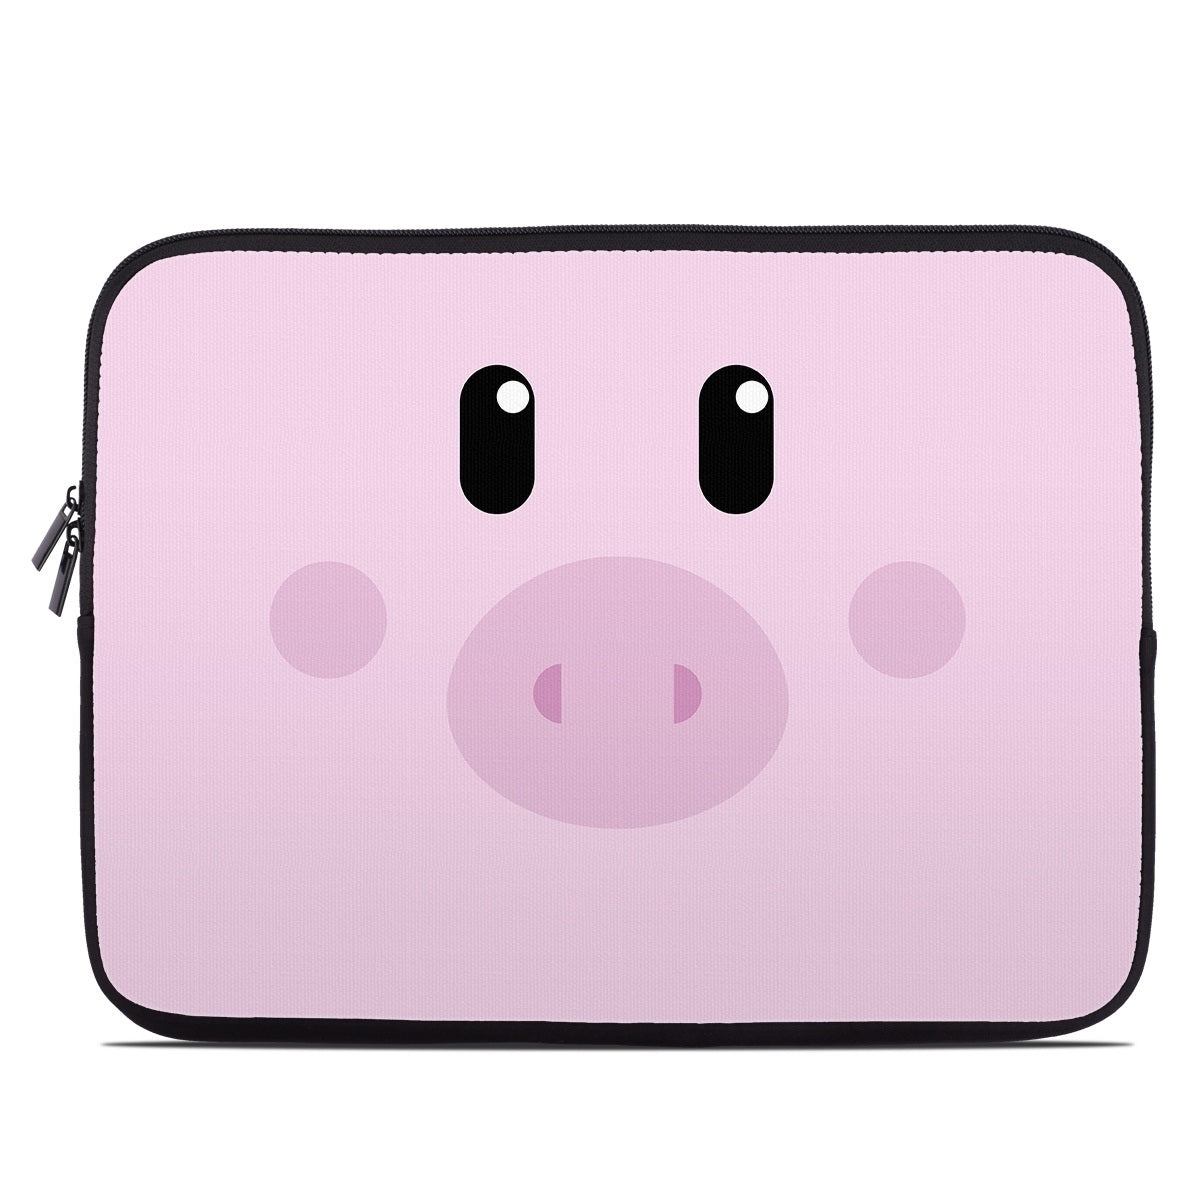 Wiggles the Pig - Laptop Sleeve